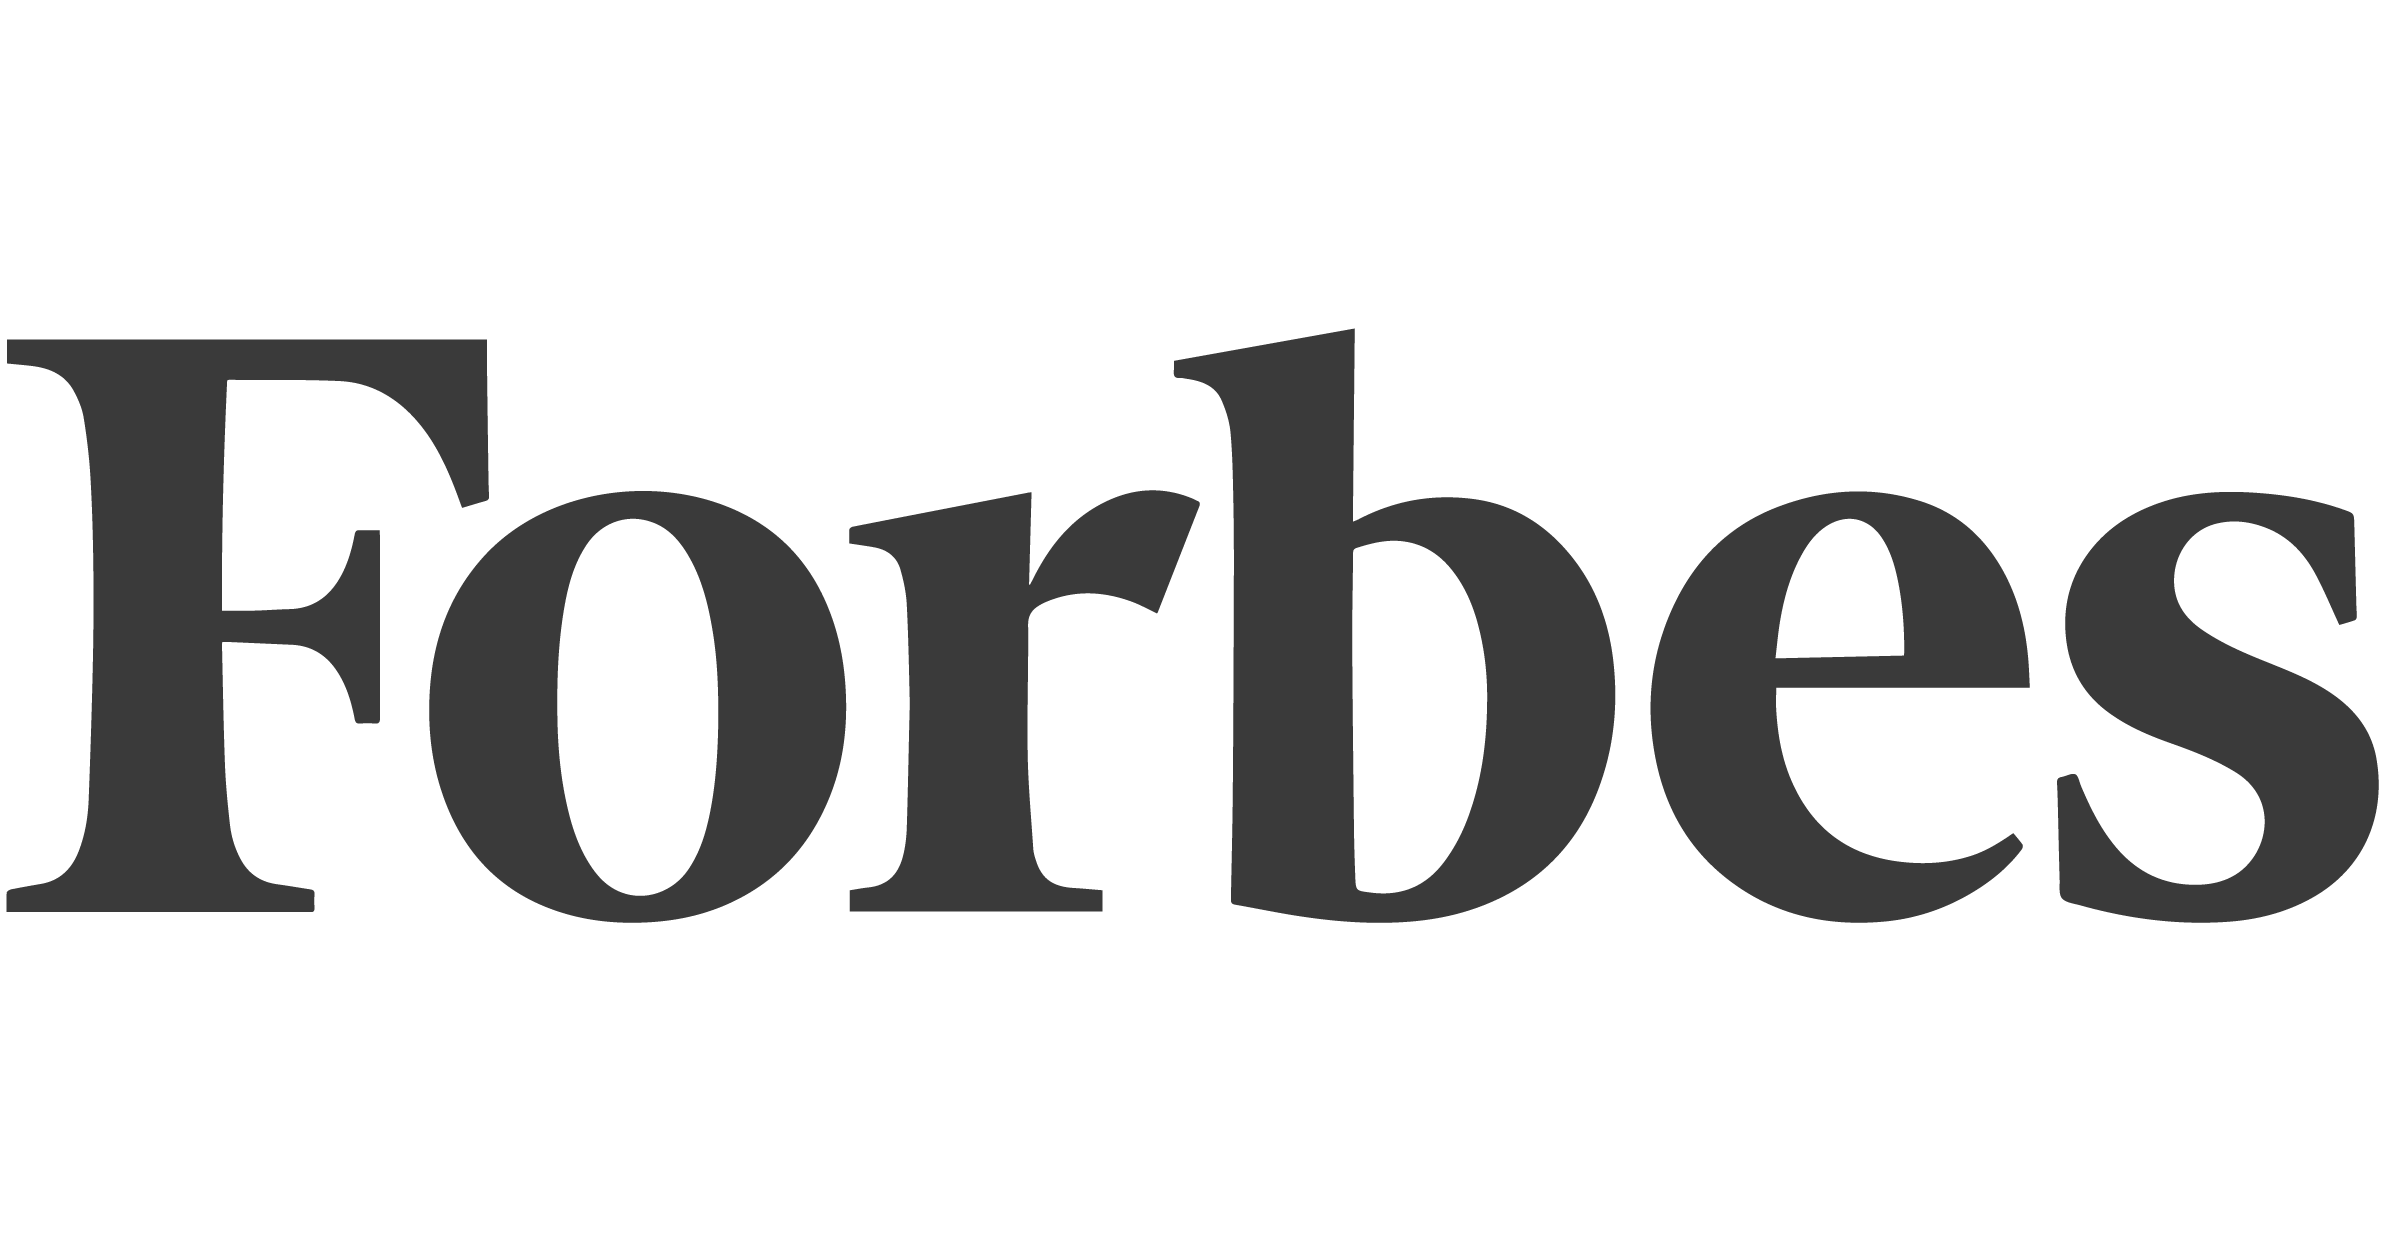 Purearth Featured in Forbes Magazine